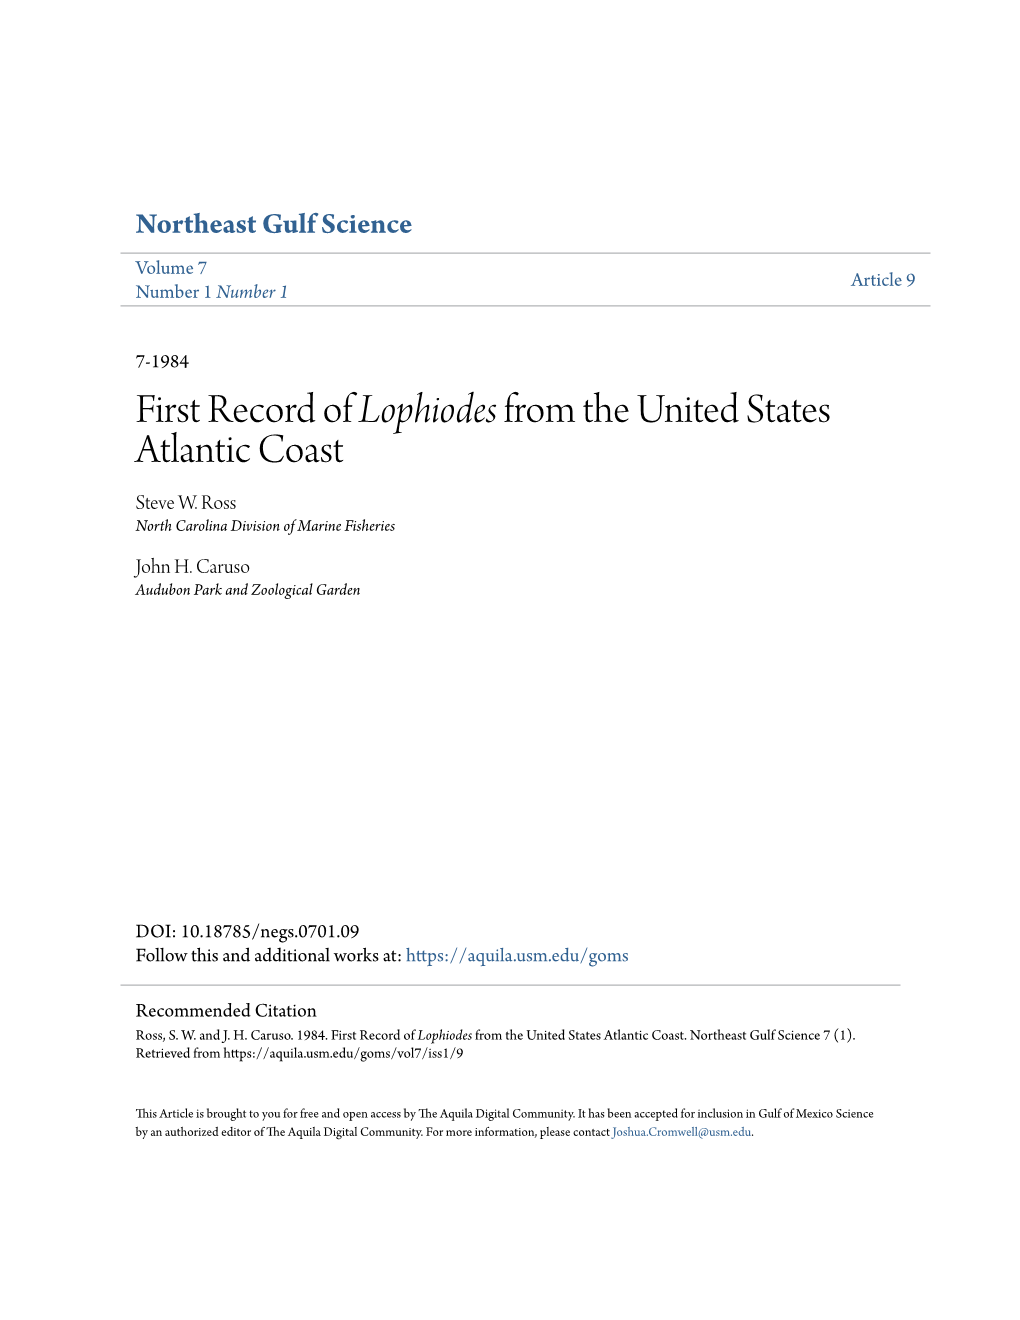 First Record of Lophiodes from the United States Atlantic Coast Steve W